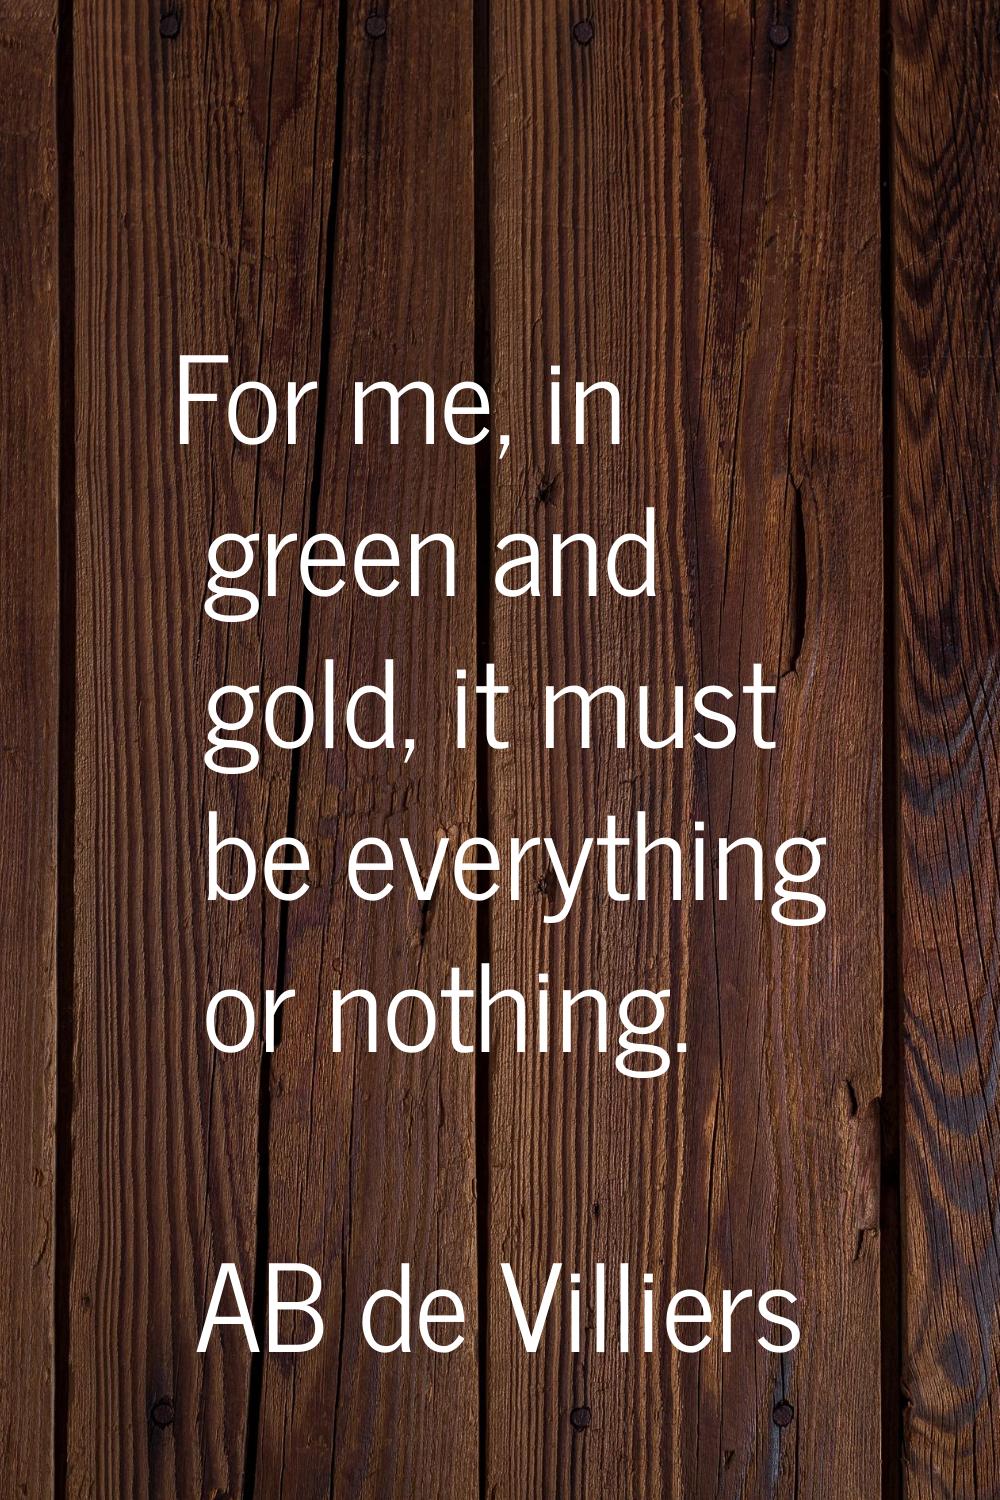 For me, in green and gold, it must be everything or nothing.